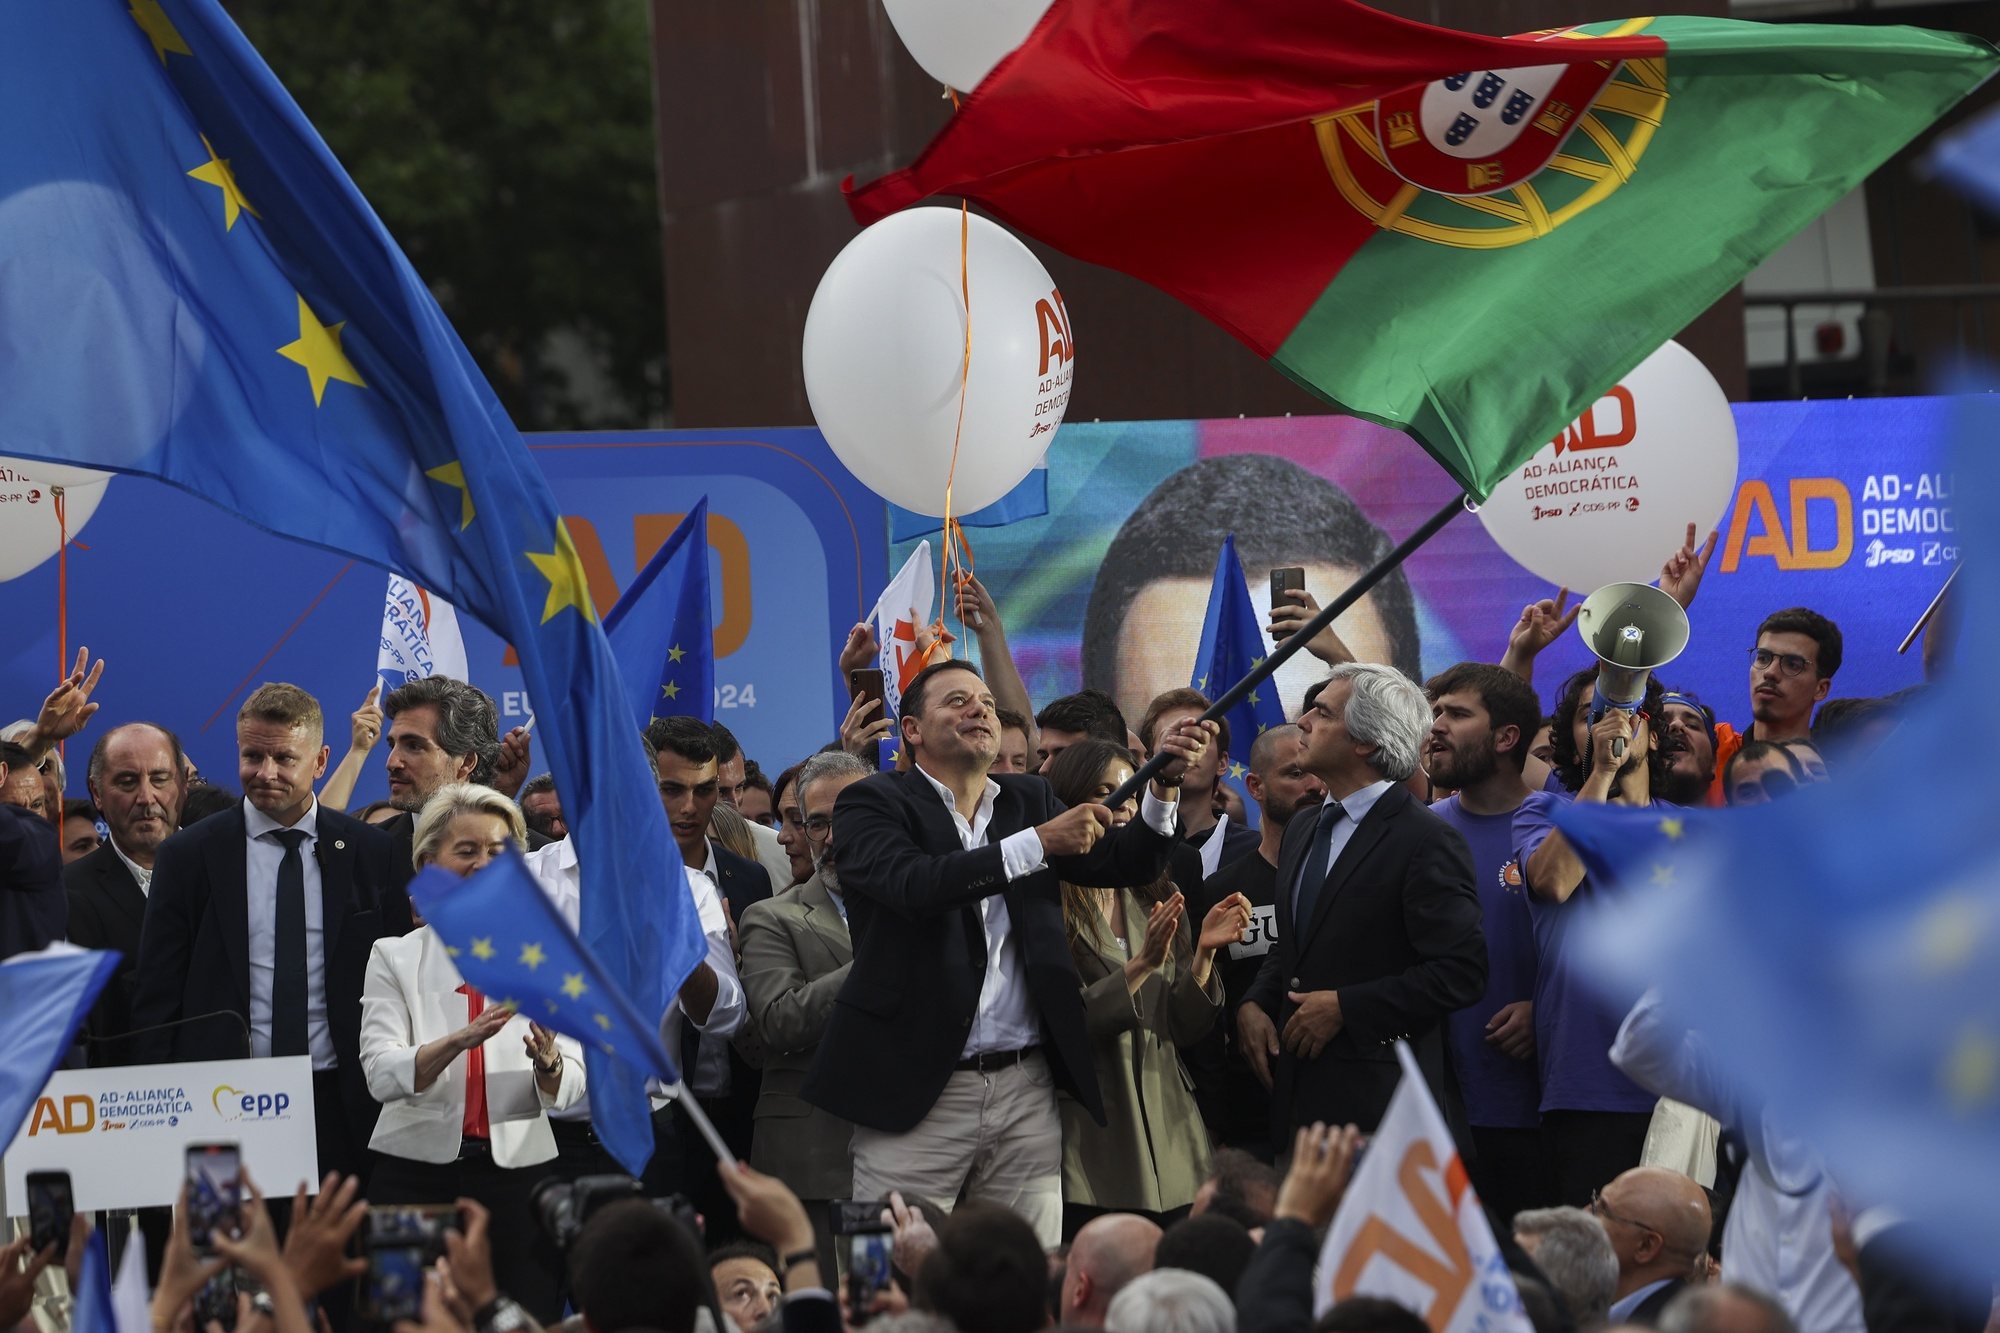 PSD (Social Democratic Party) leader, Luis Montenegro (C), holds a portuguese flag during a Democratic Alliance (AD) rally as part of the campaign for the European elections, Porto, Portugal, on 6th June 2024. TIAGO PETINGA/LUSA